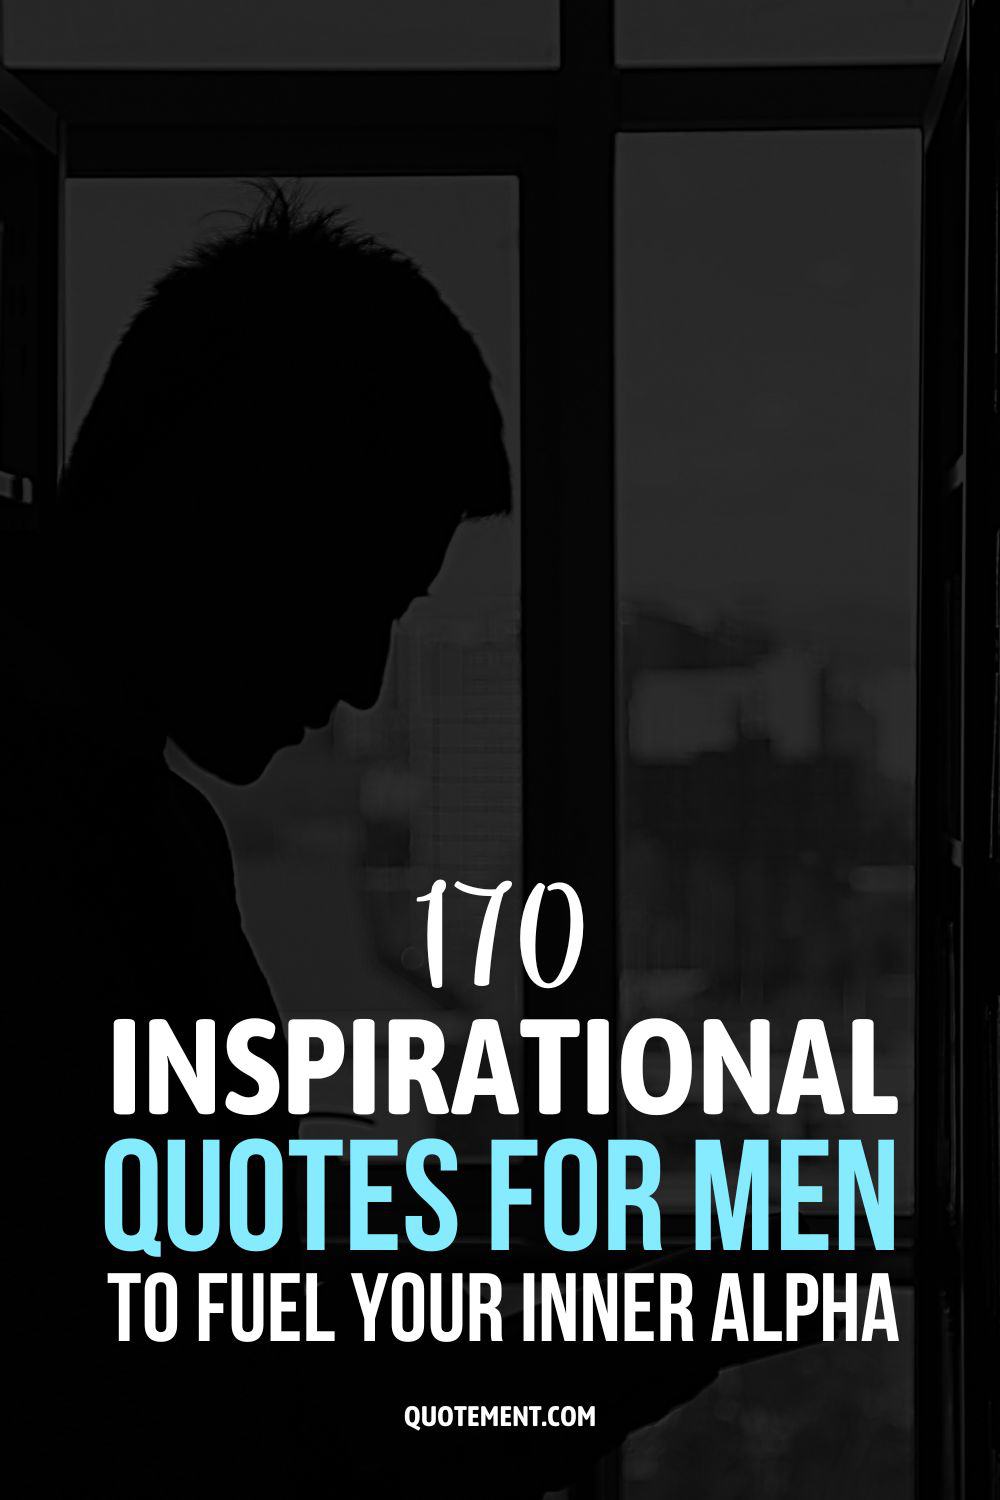 170 Inspirational Quotes For Men To Fuel Your Inner Alpha